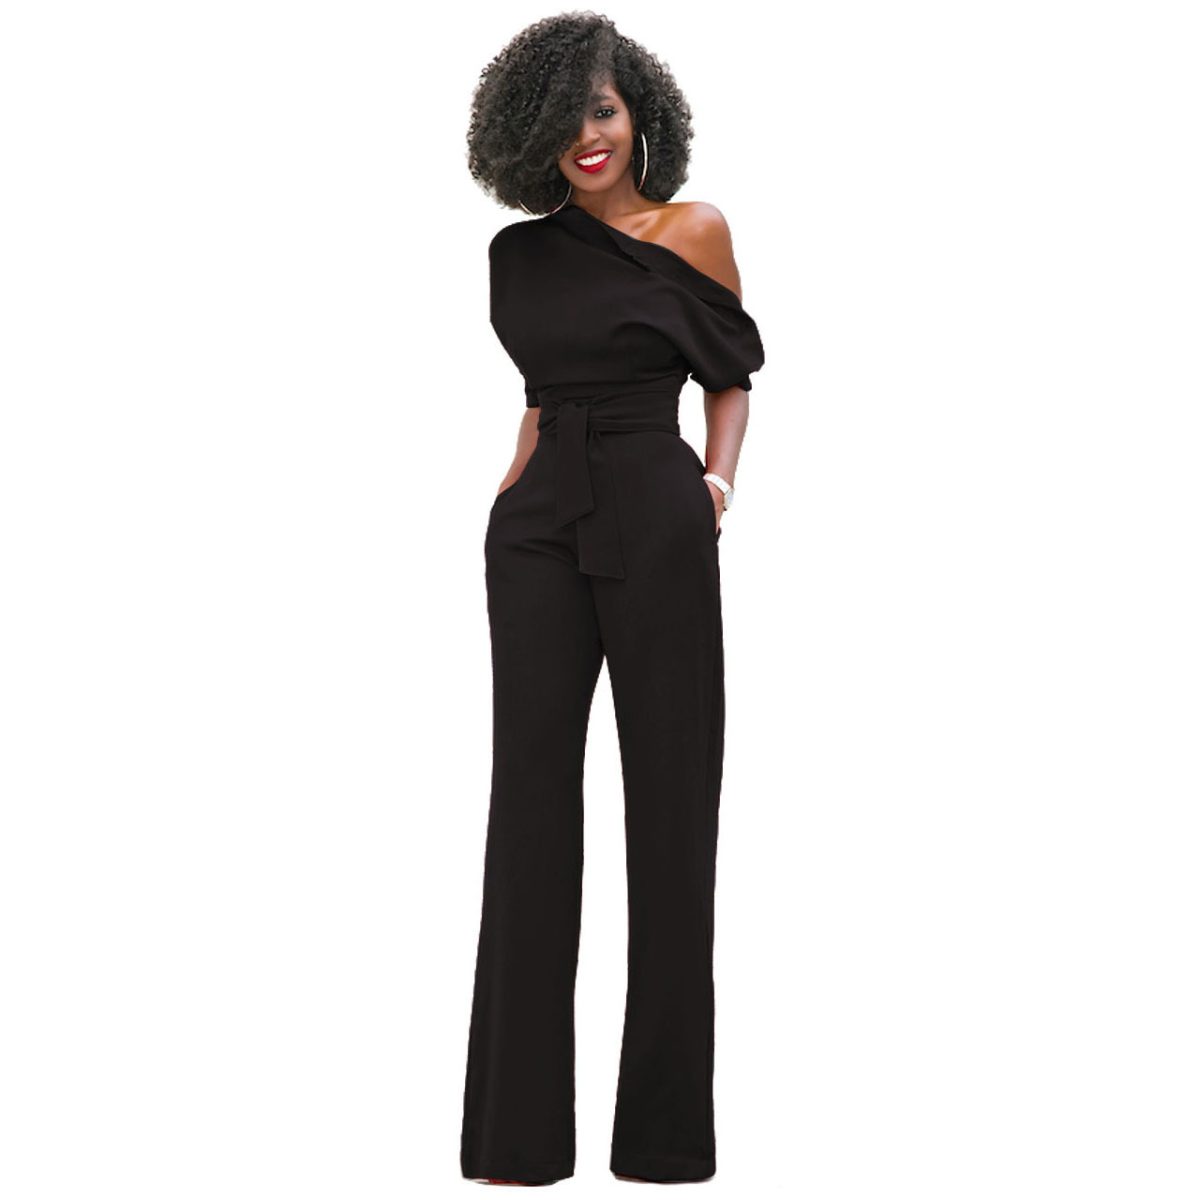 Classic Solid Color Diagonal Collar Button One Piece Wide Leg Jumpsuit in Jumpsuits & Rompers